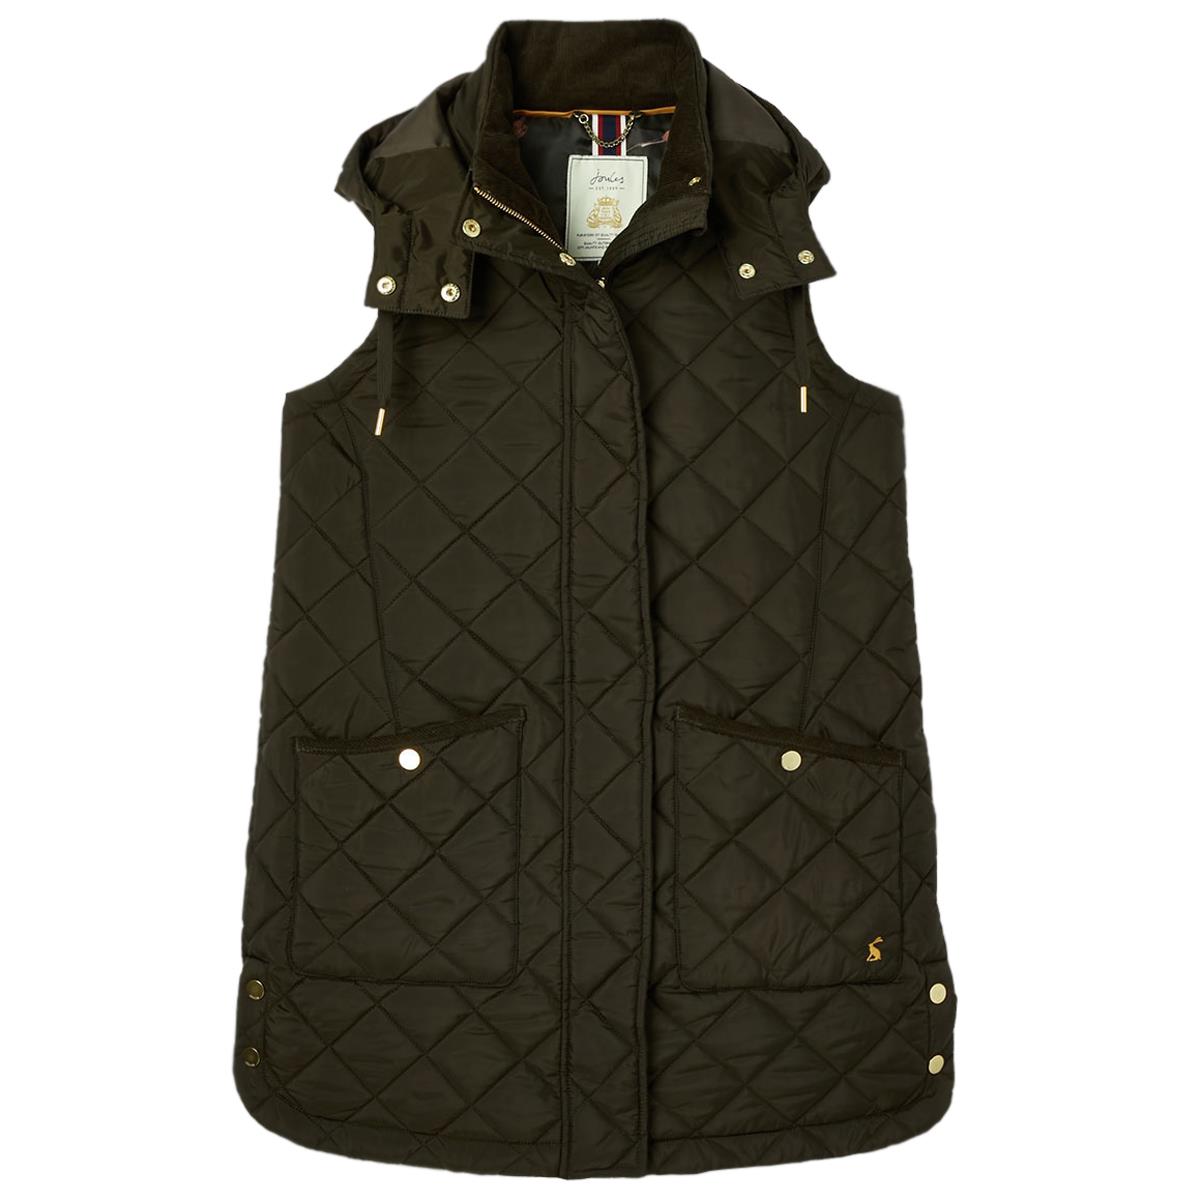 What material is the Joules Chatham gilet made of?